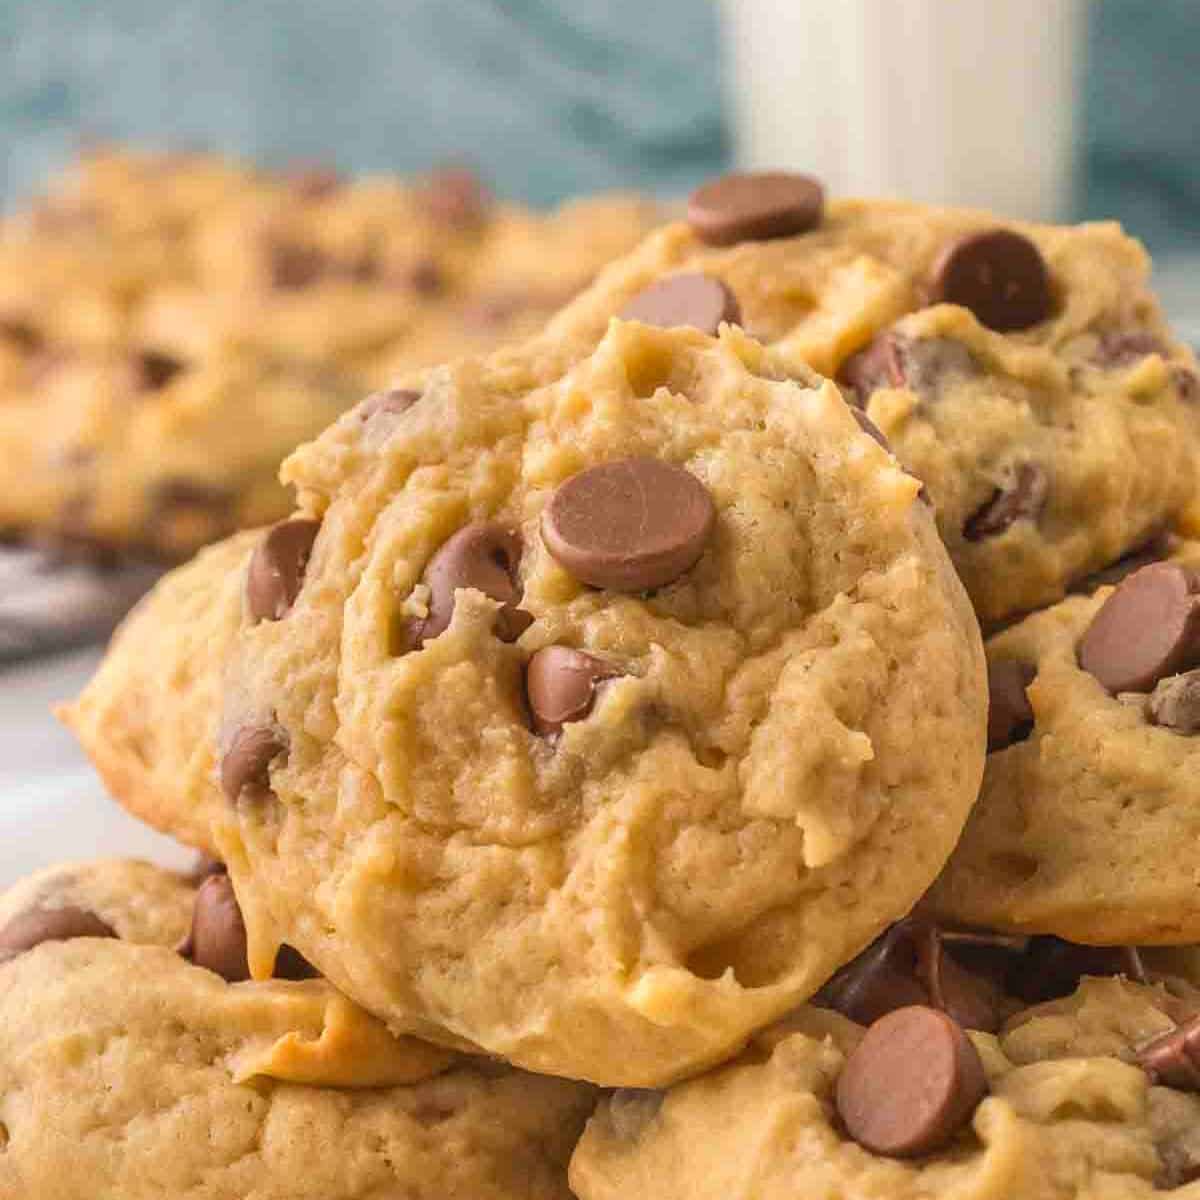 Sugar Free Chocolate Chip Pudding Cookies, a delicious soft and chewy dessert or snack recipe made with no added sugar. low carb keto